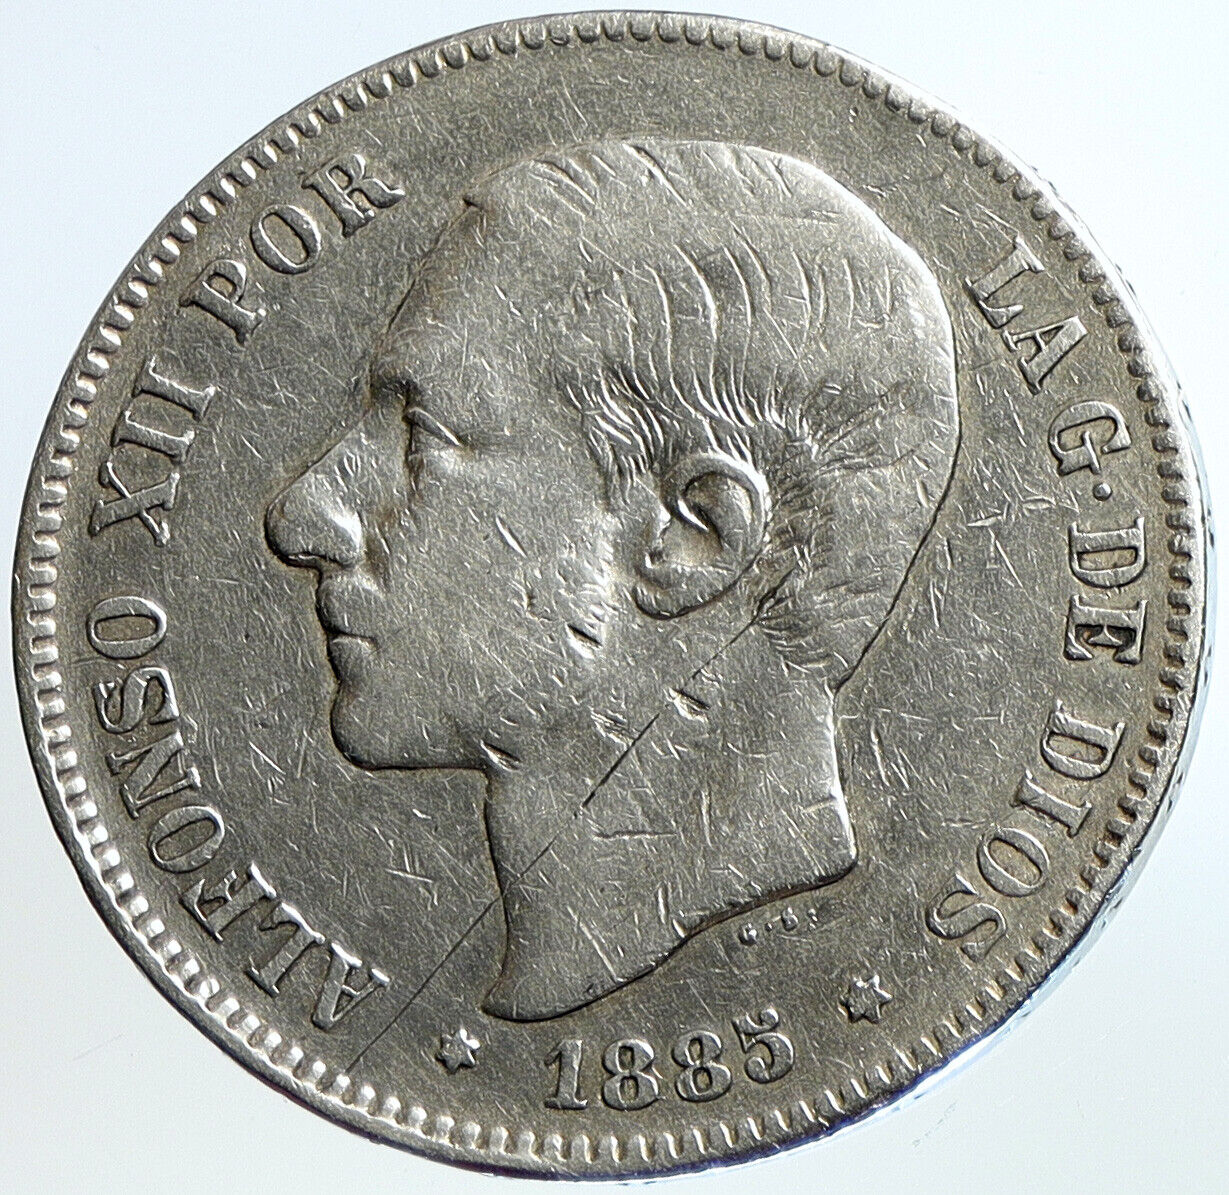 1885 SPAIN w King ALFONSO XII Antique OLD SPANISH Silver 5 Pesetas Coin i113440